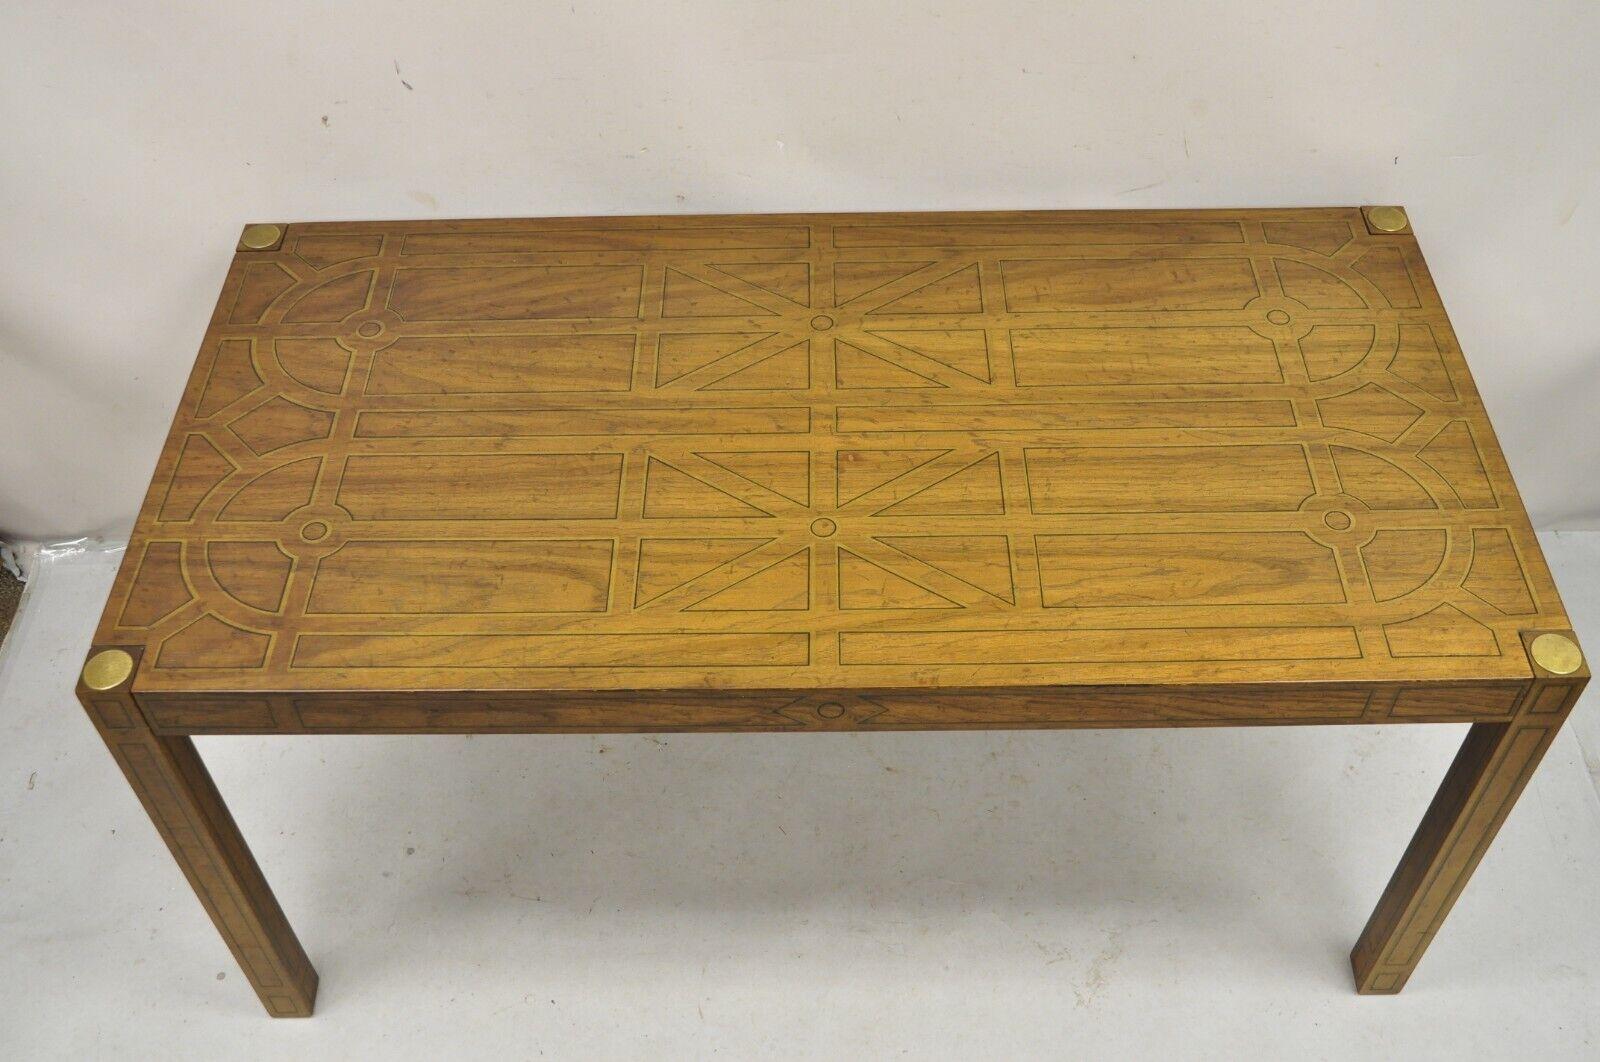 20th Century Drexel Oxford Square Geometric Painted Parsons Style Console Desk Dining Table For Sale